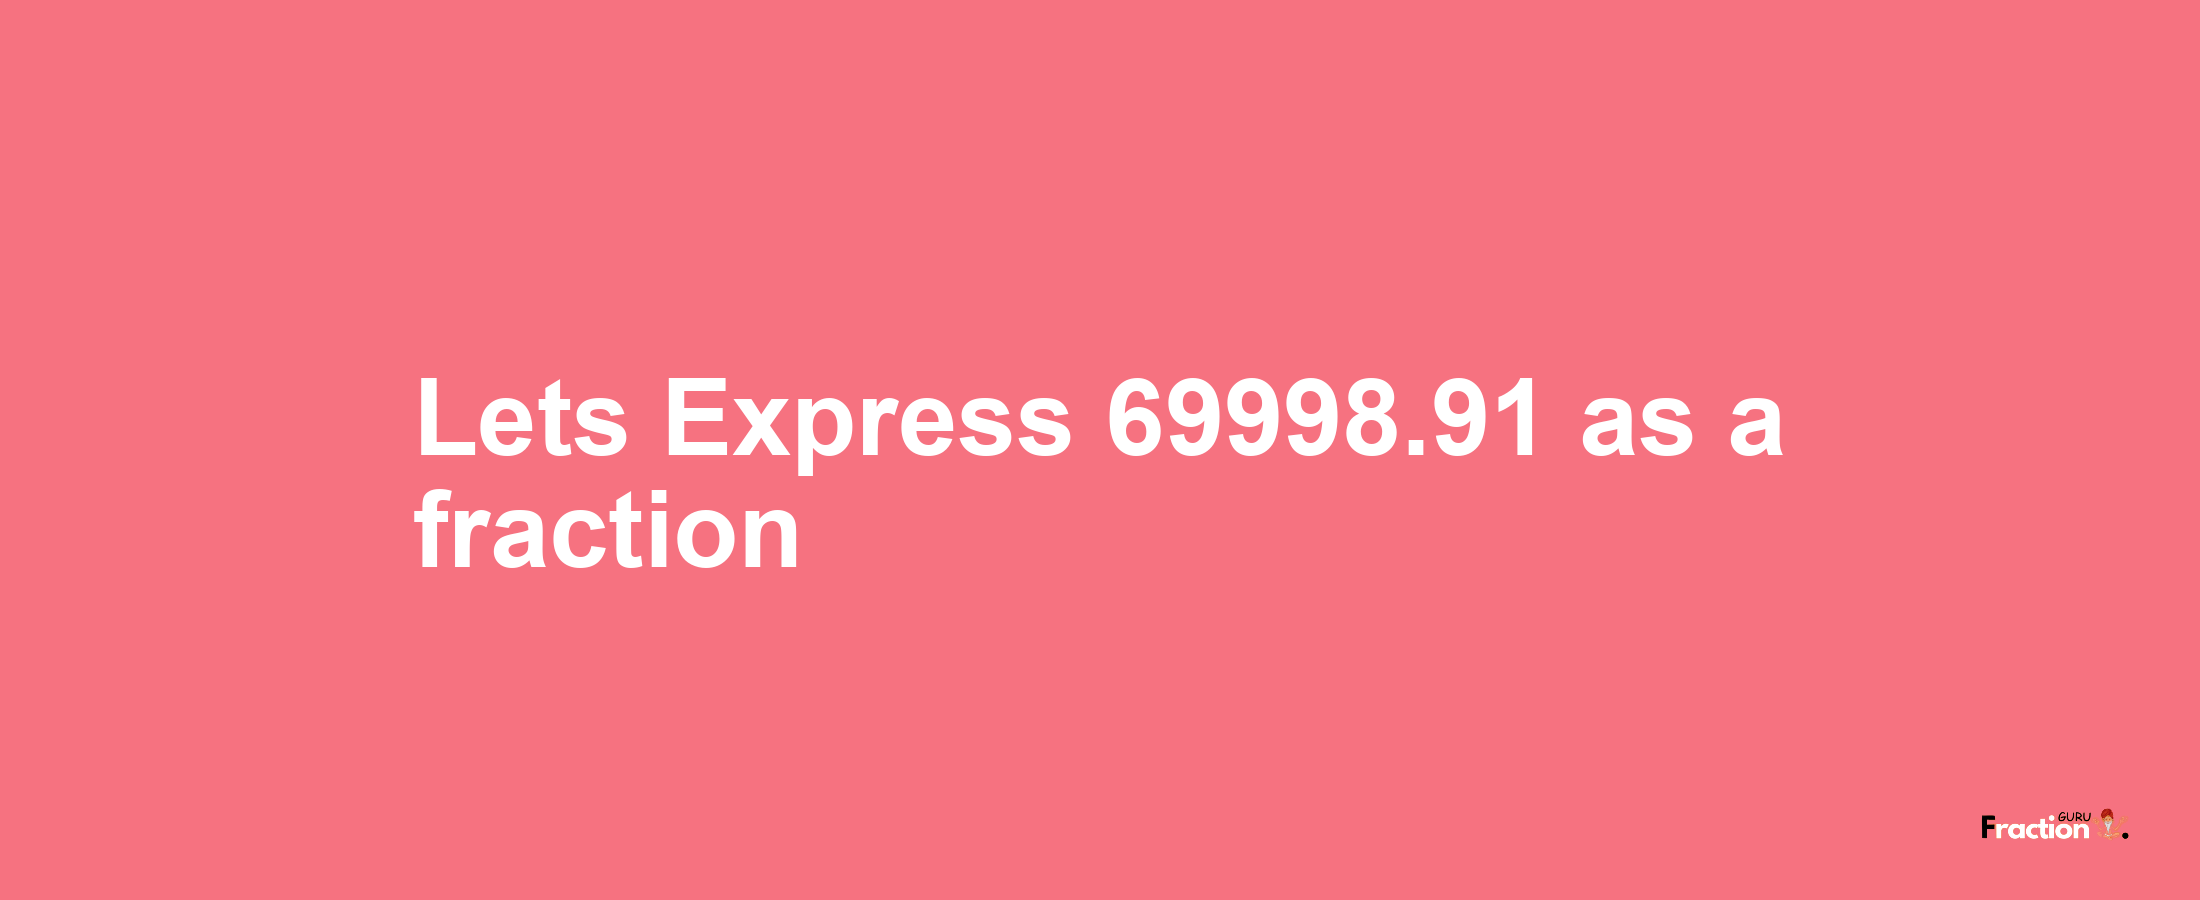 Lets Express 69998.91 as afraction